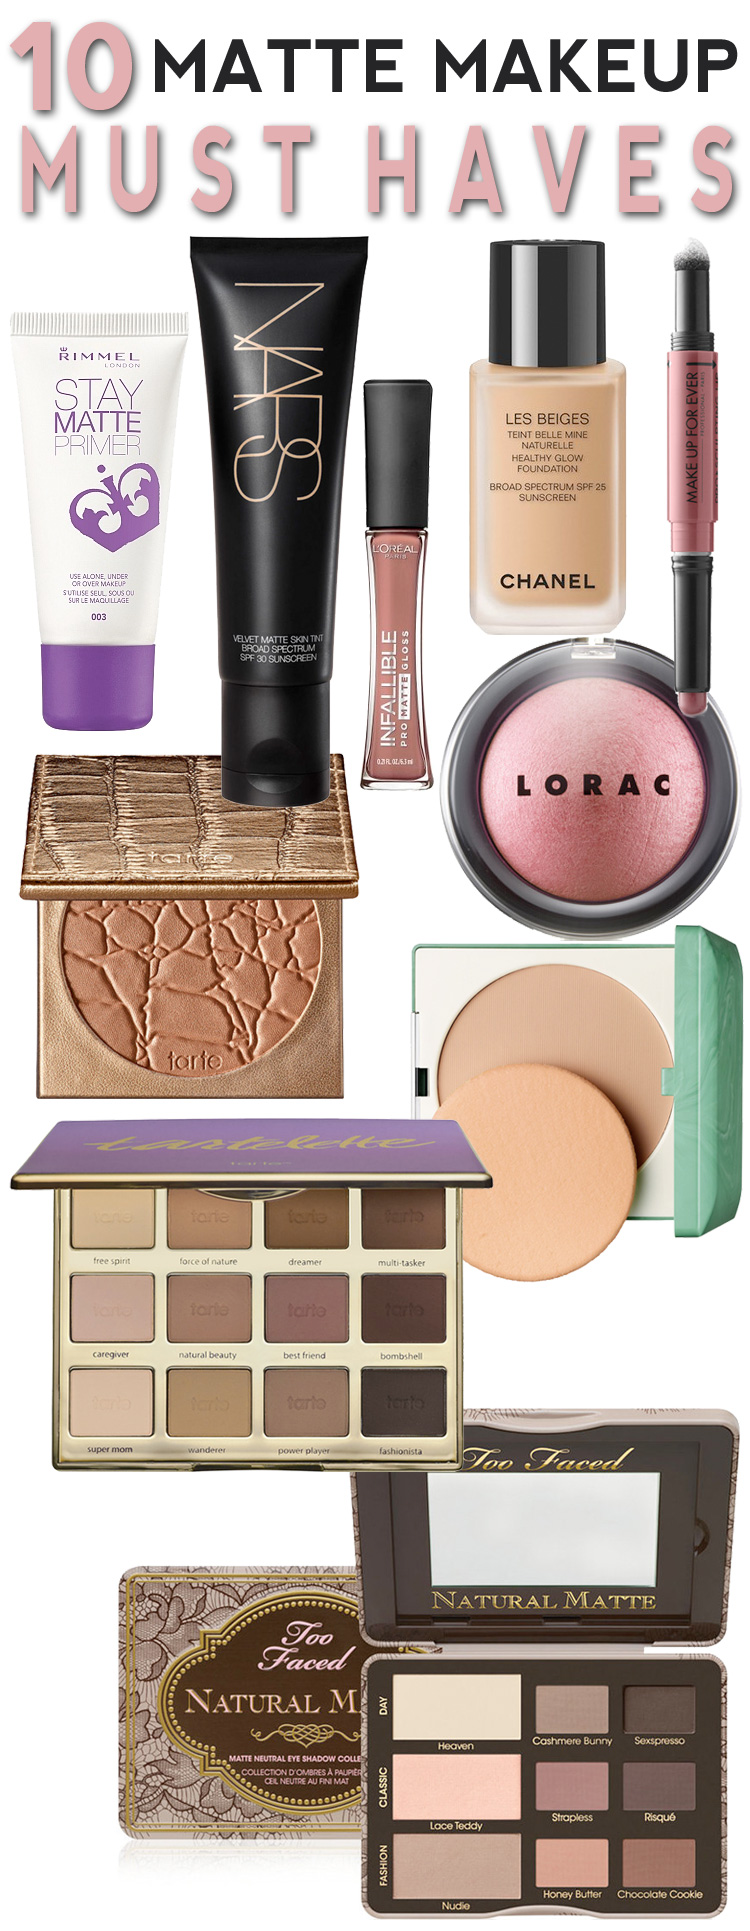 10 Matte Makeup Must-Haves to Keep Your Face Looking Fresh, Fab and Beautiful All Summer Long!